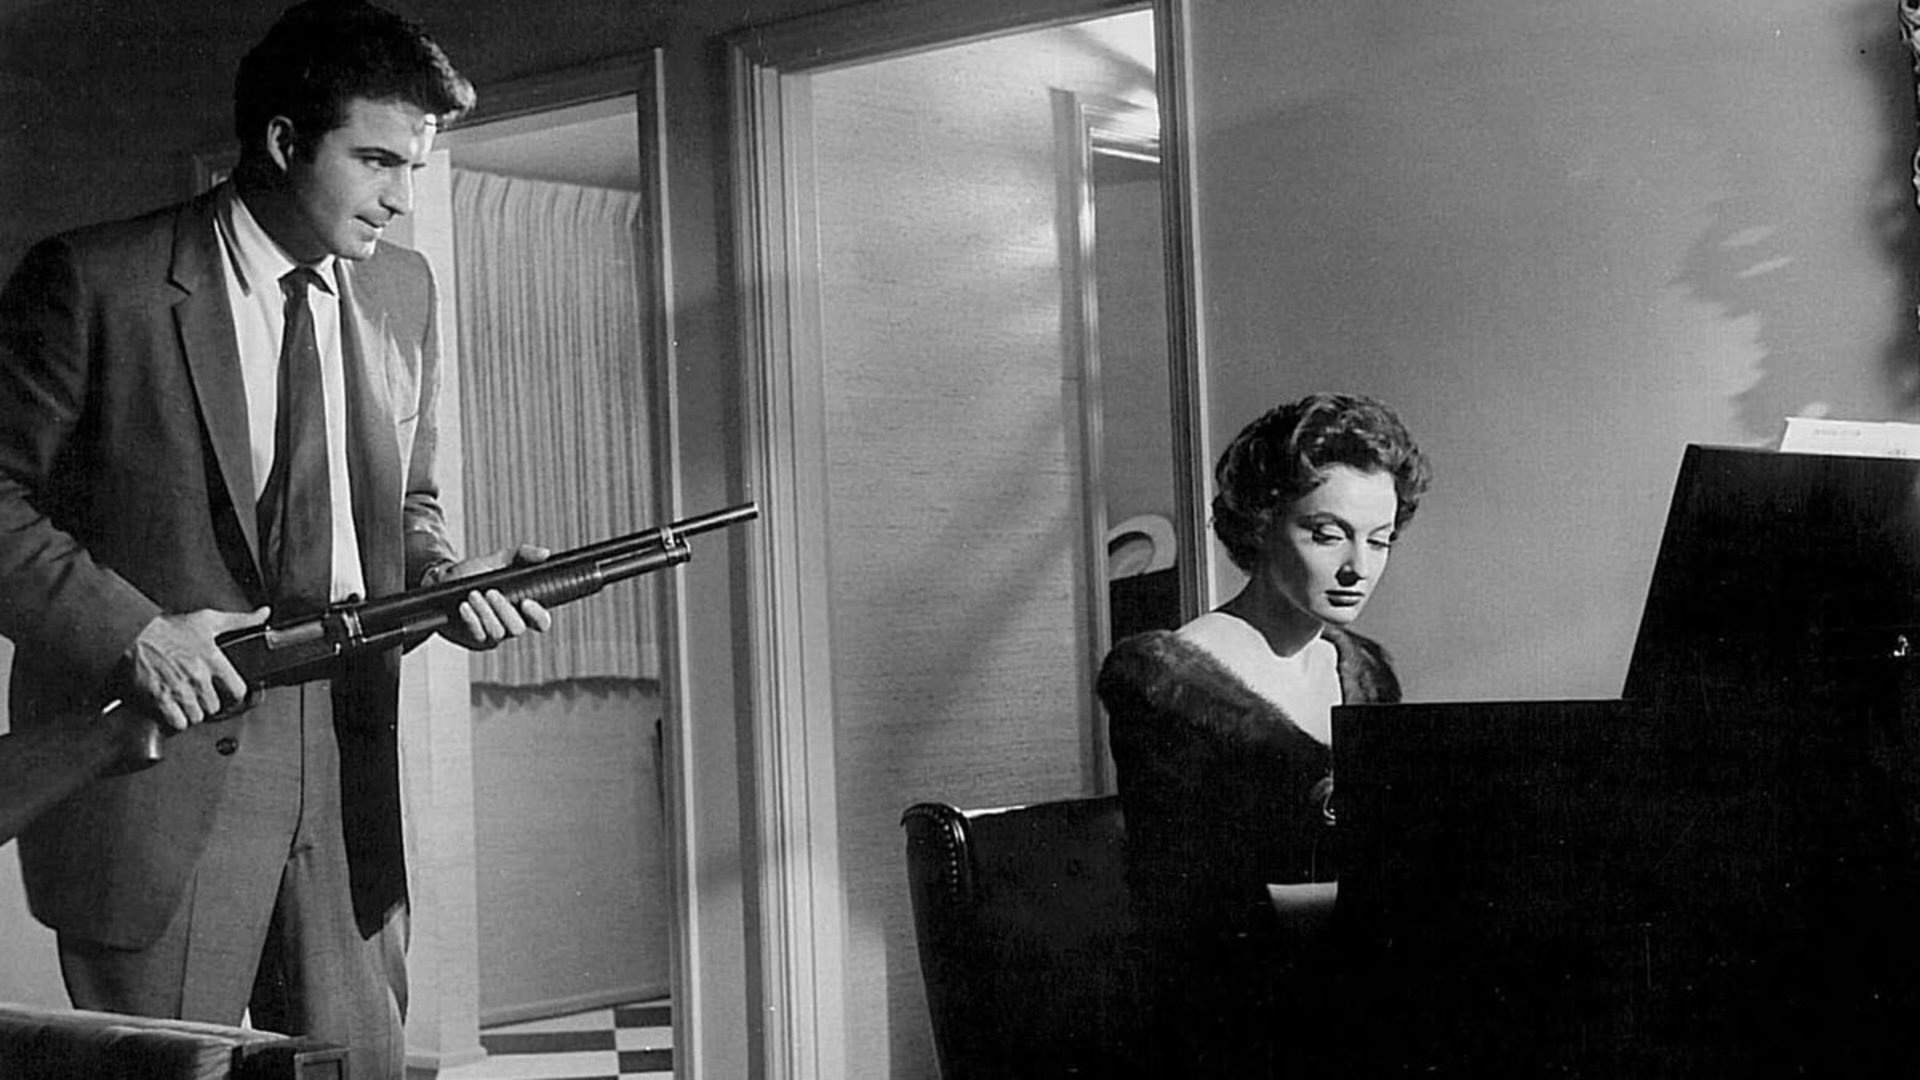 Still from the 1958 film Murder by Contract